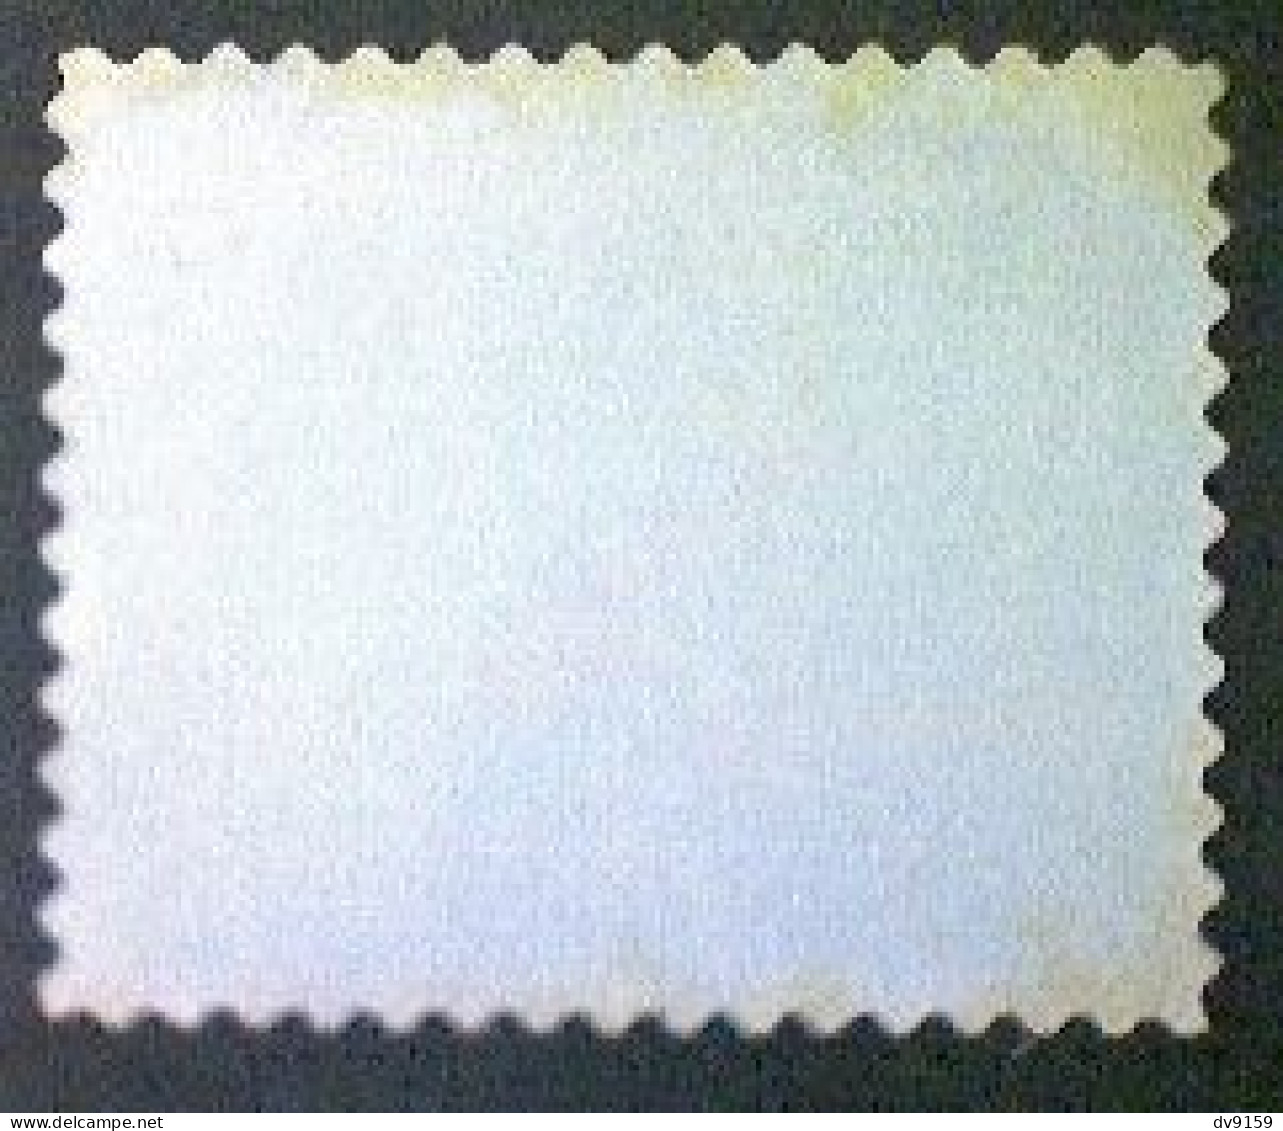 New Zealand, Scott #1226, Used(o), 1994, People Reaching People, 45¢, Multicolored - Used Stamps